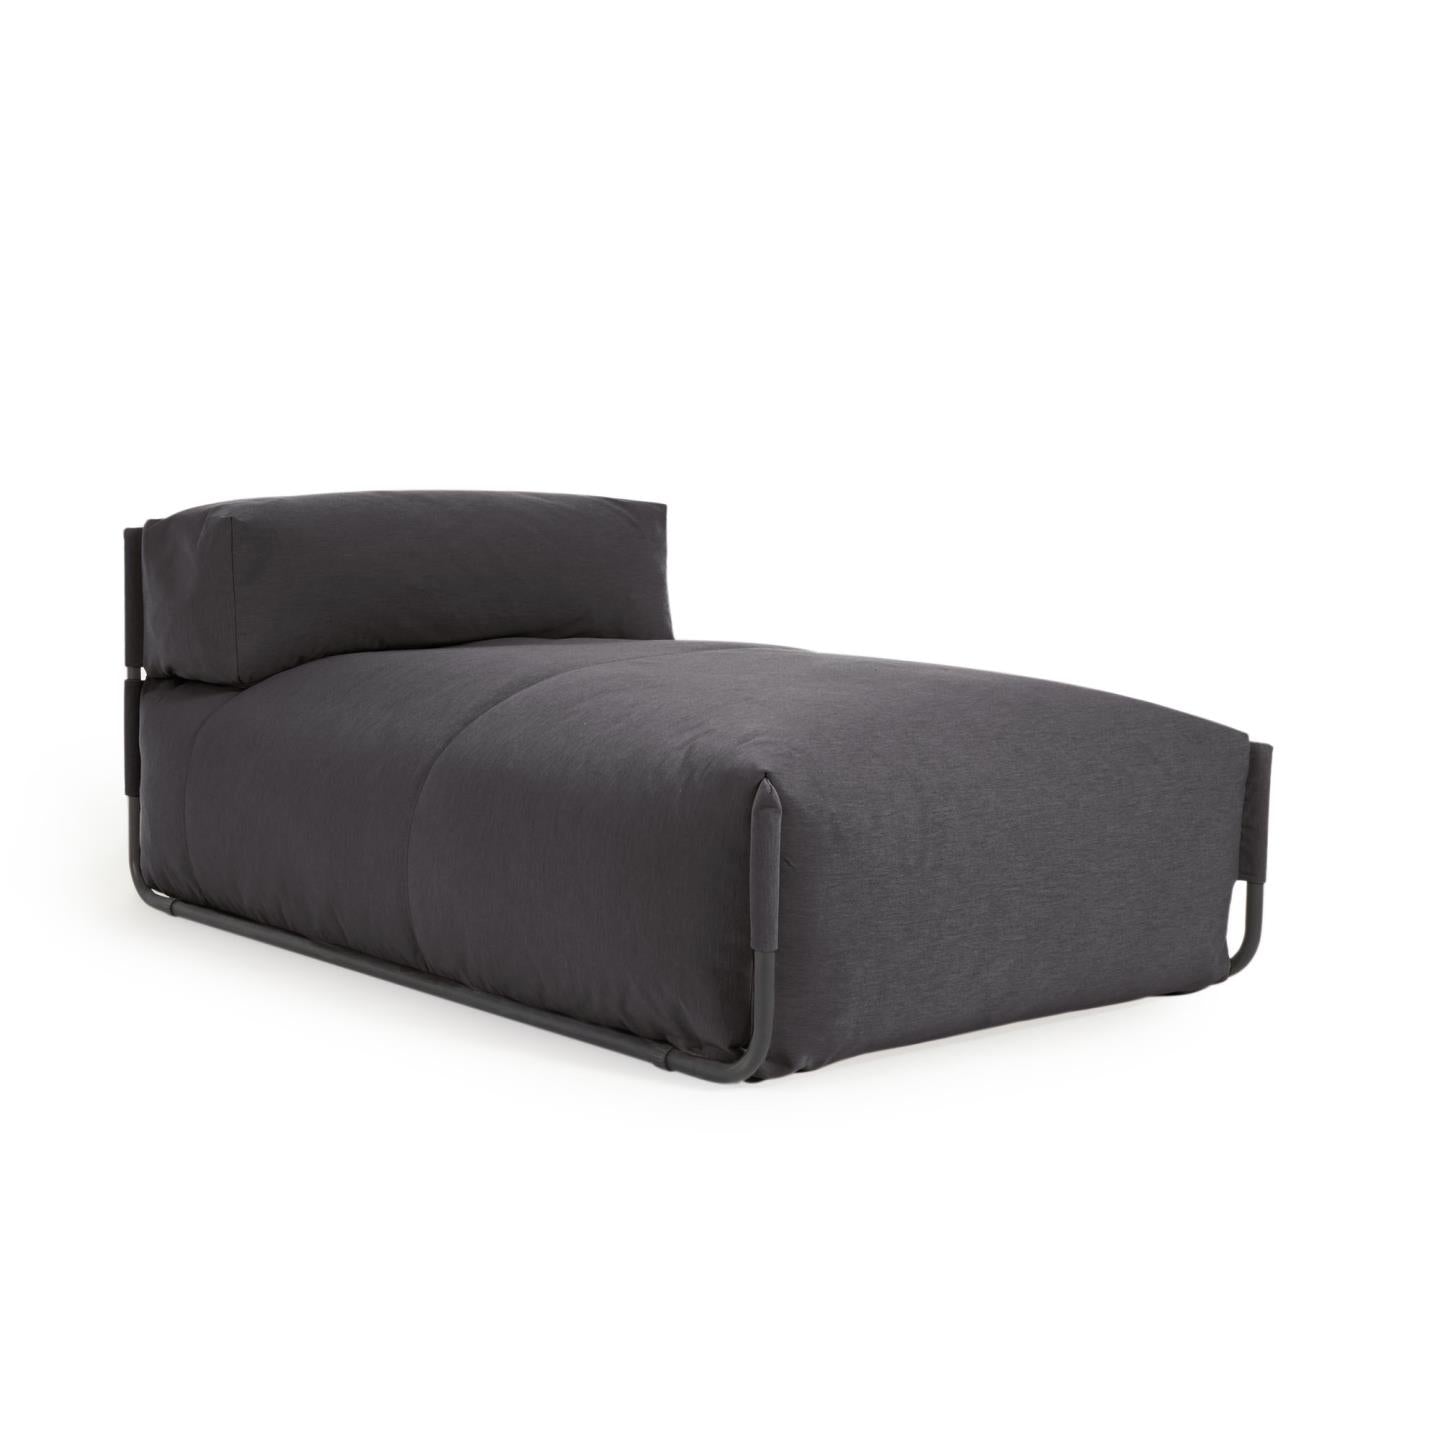 Square chaise longue pouffe with backrest in dark grey with black aluminium, 165 x 101 cm